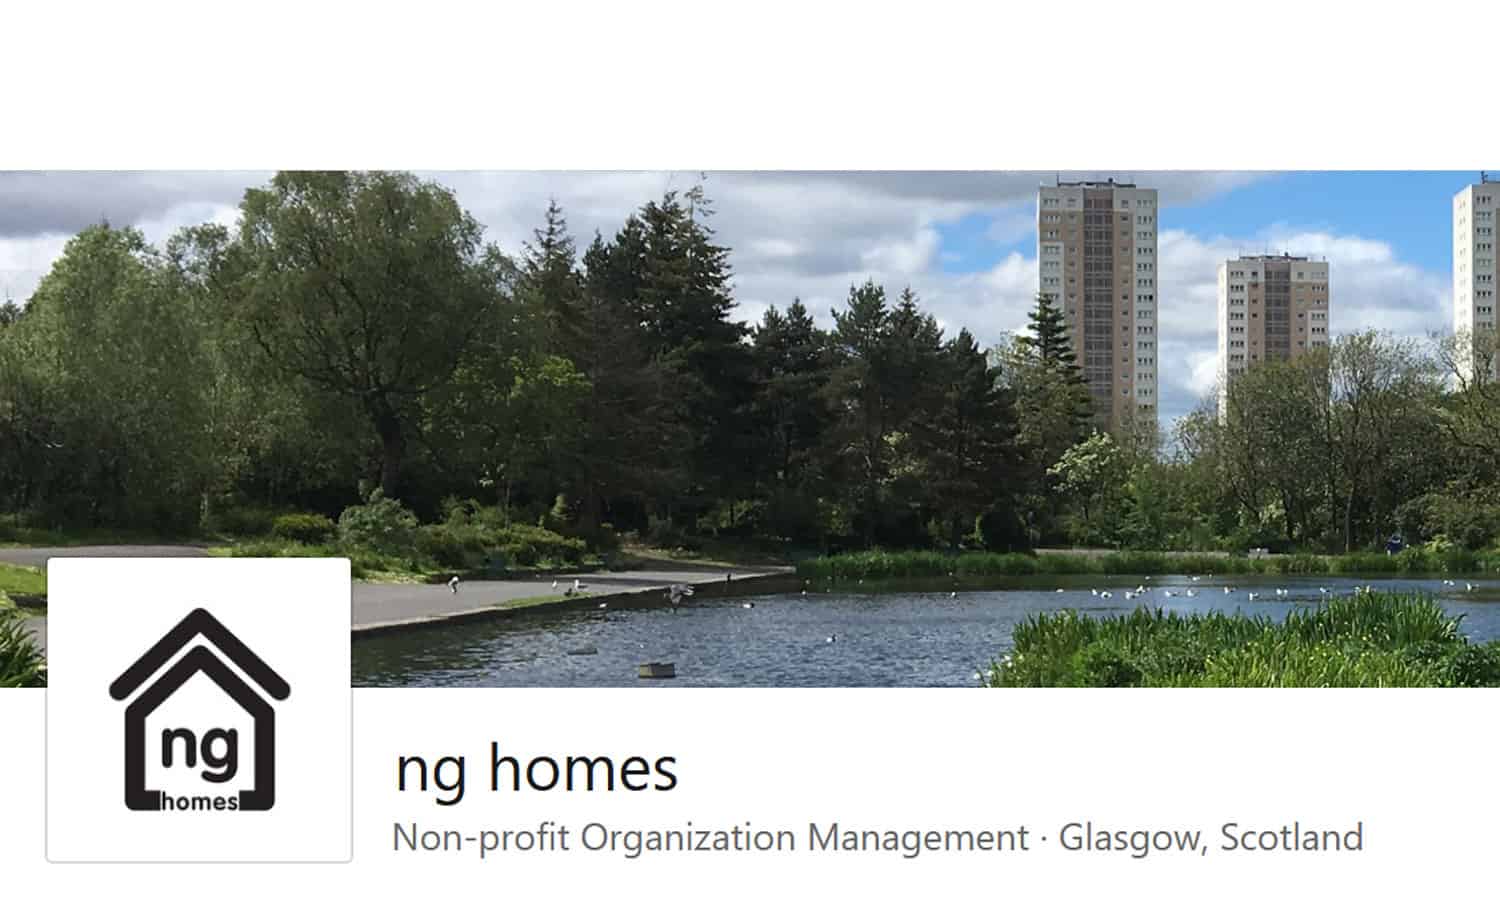 ECD Architects has been appointed to the ng homes 4 year framework.